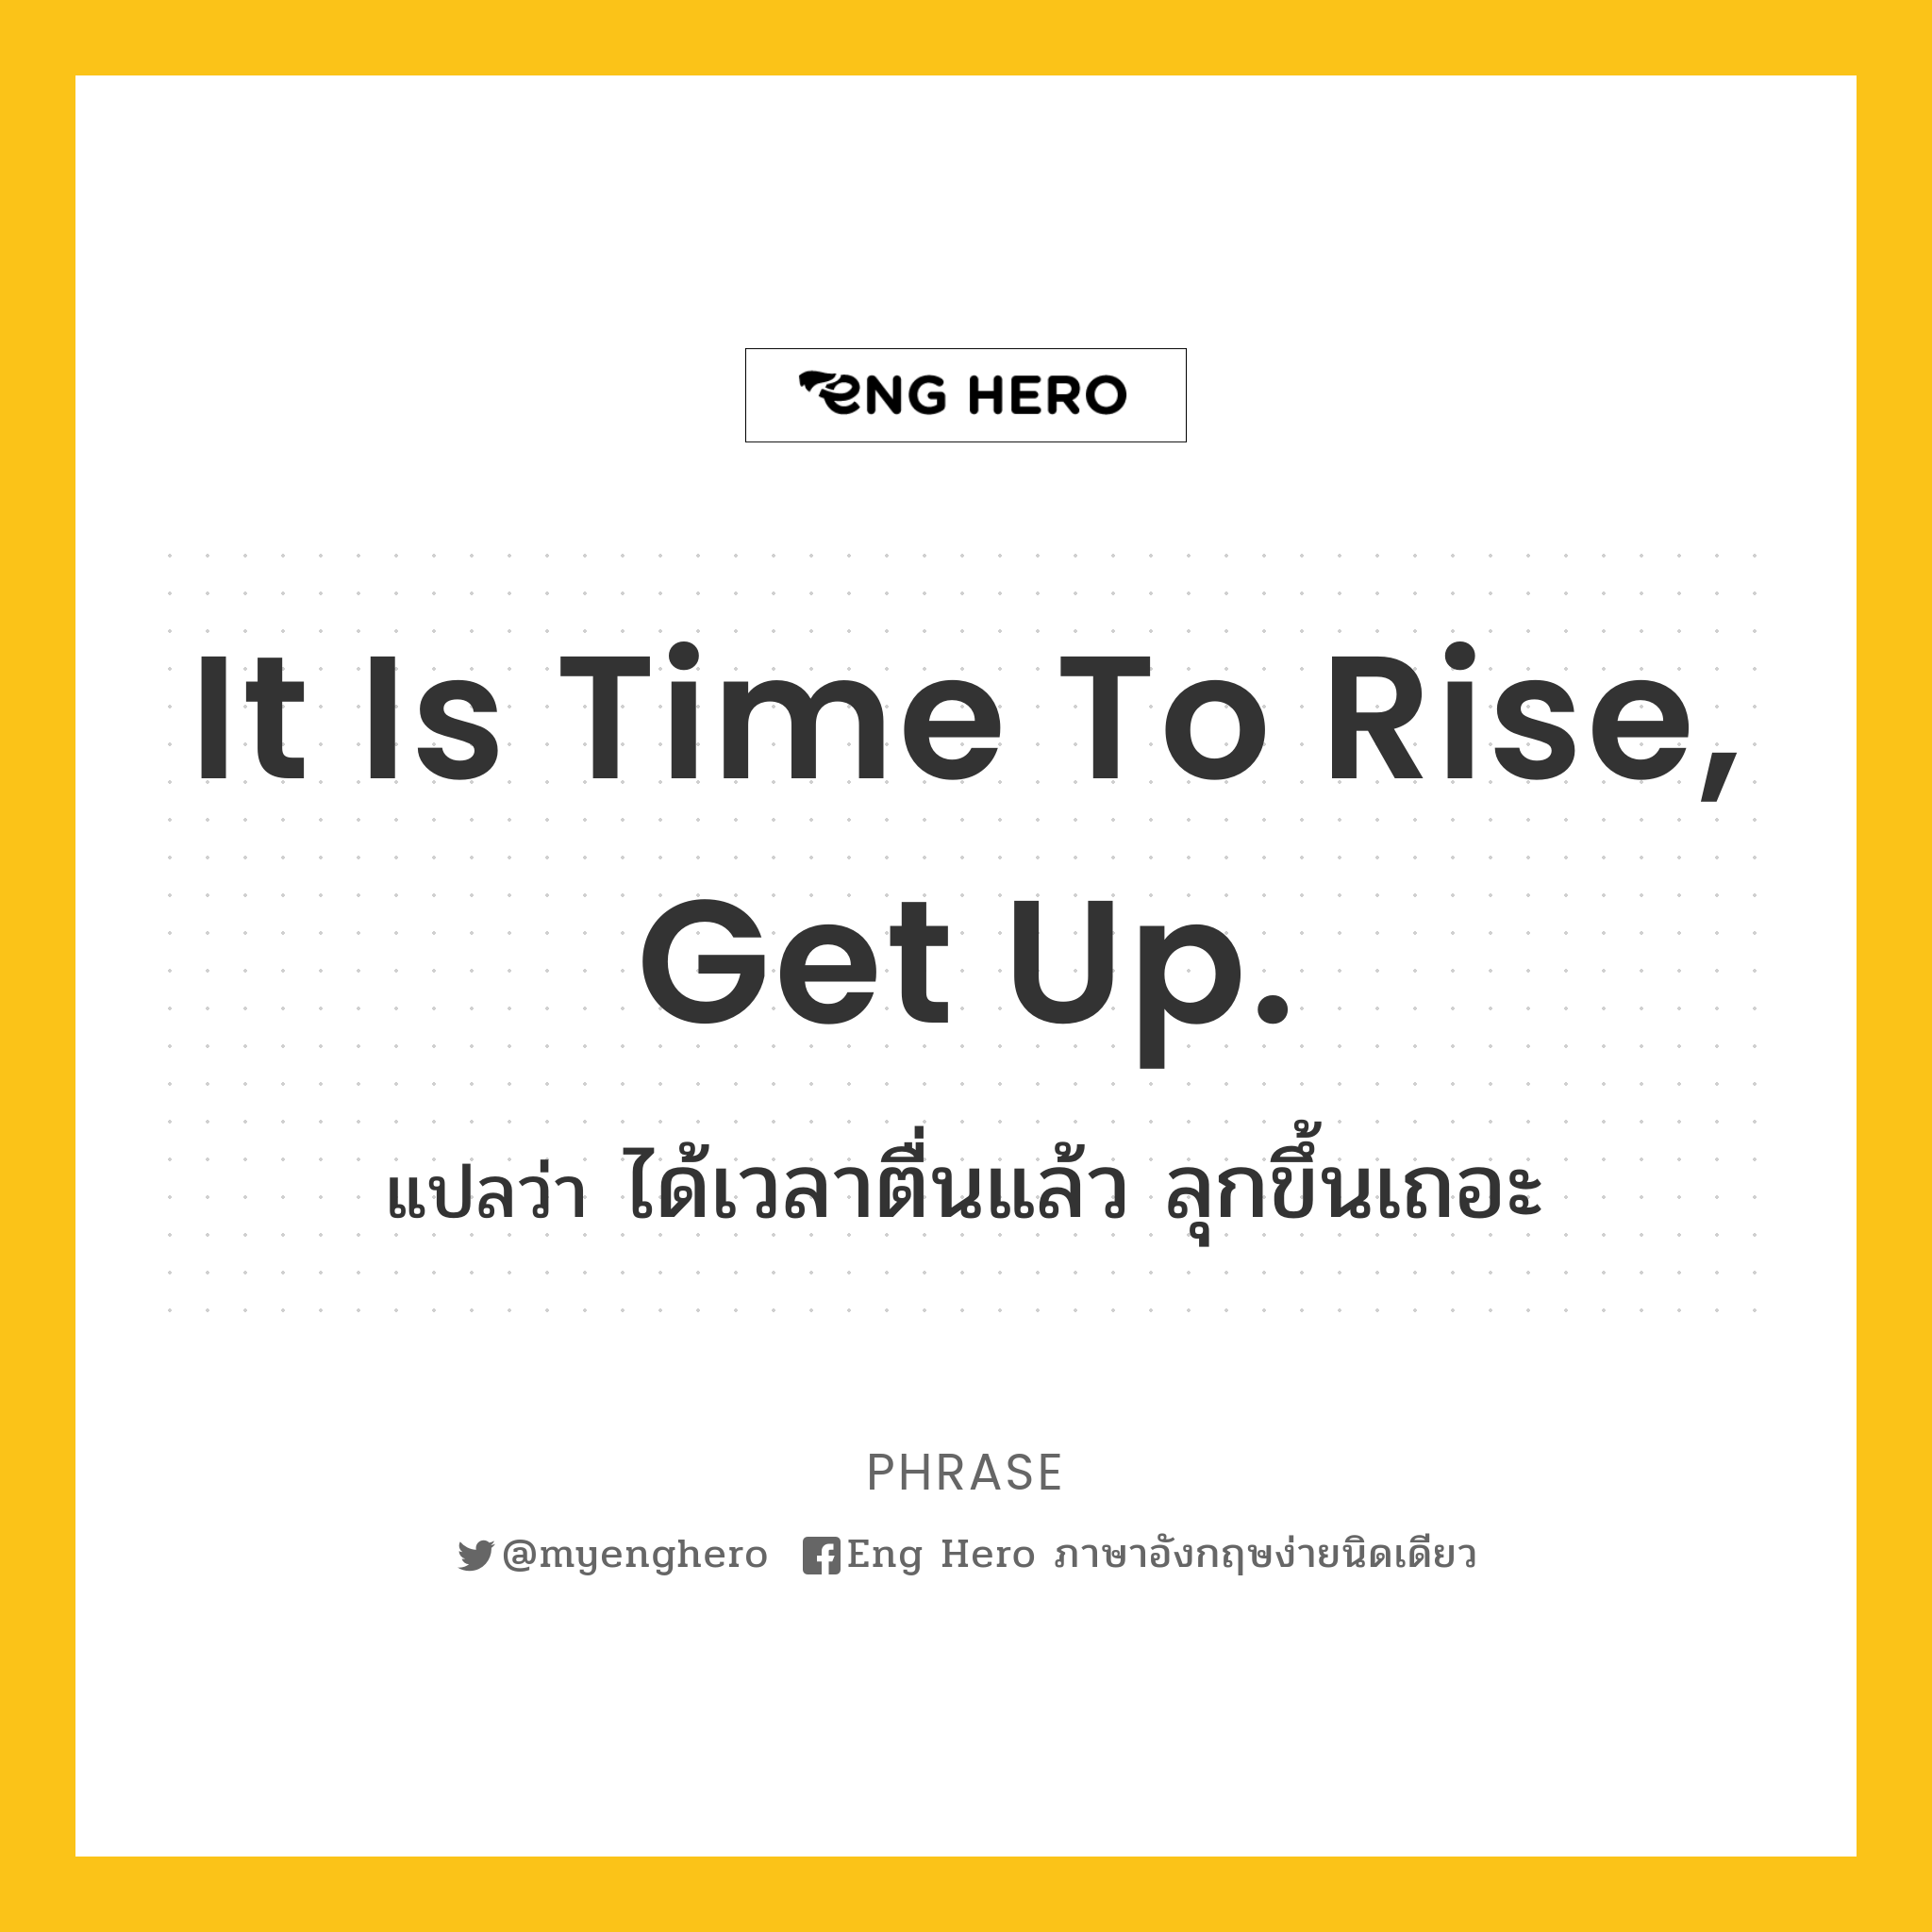 It is time to rise, get up.